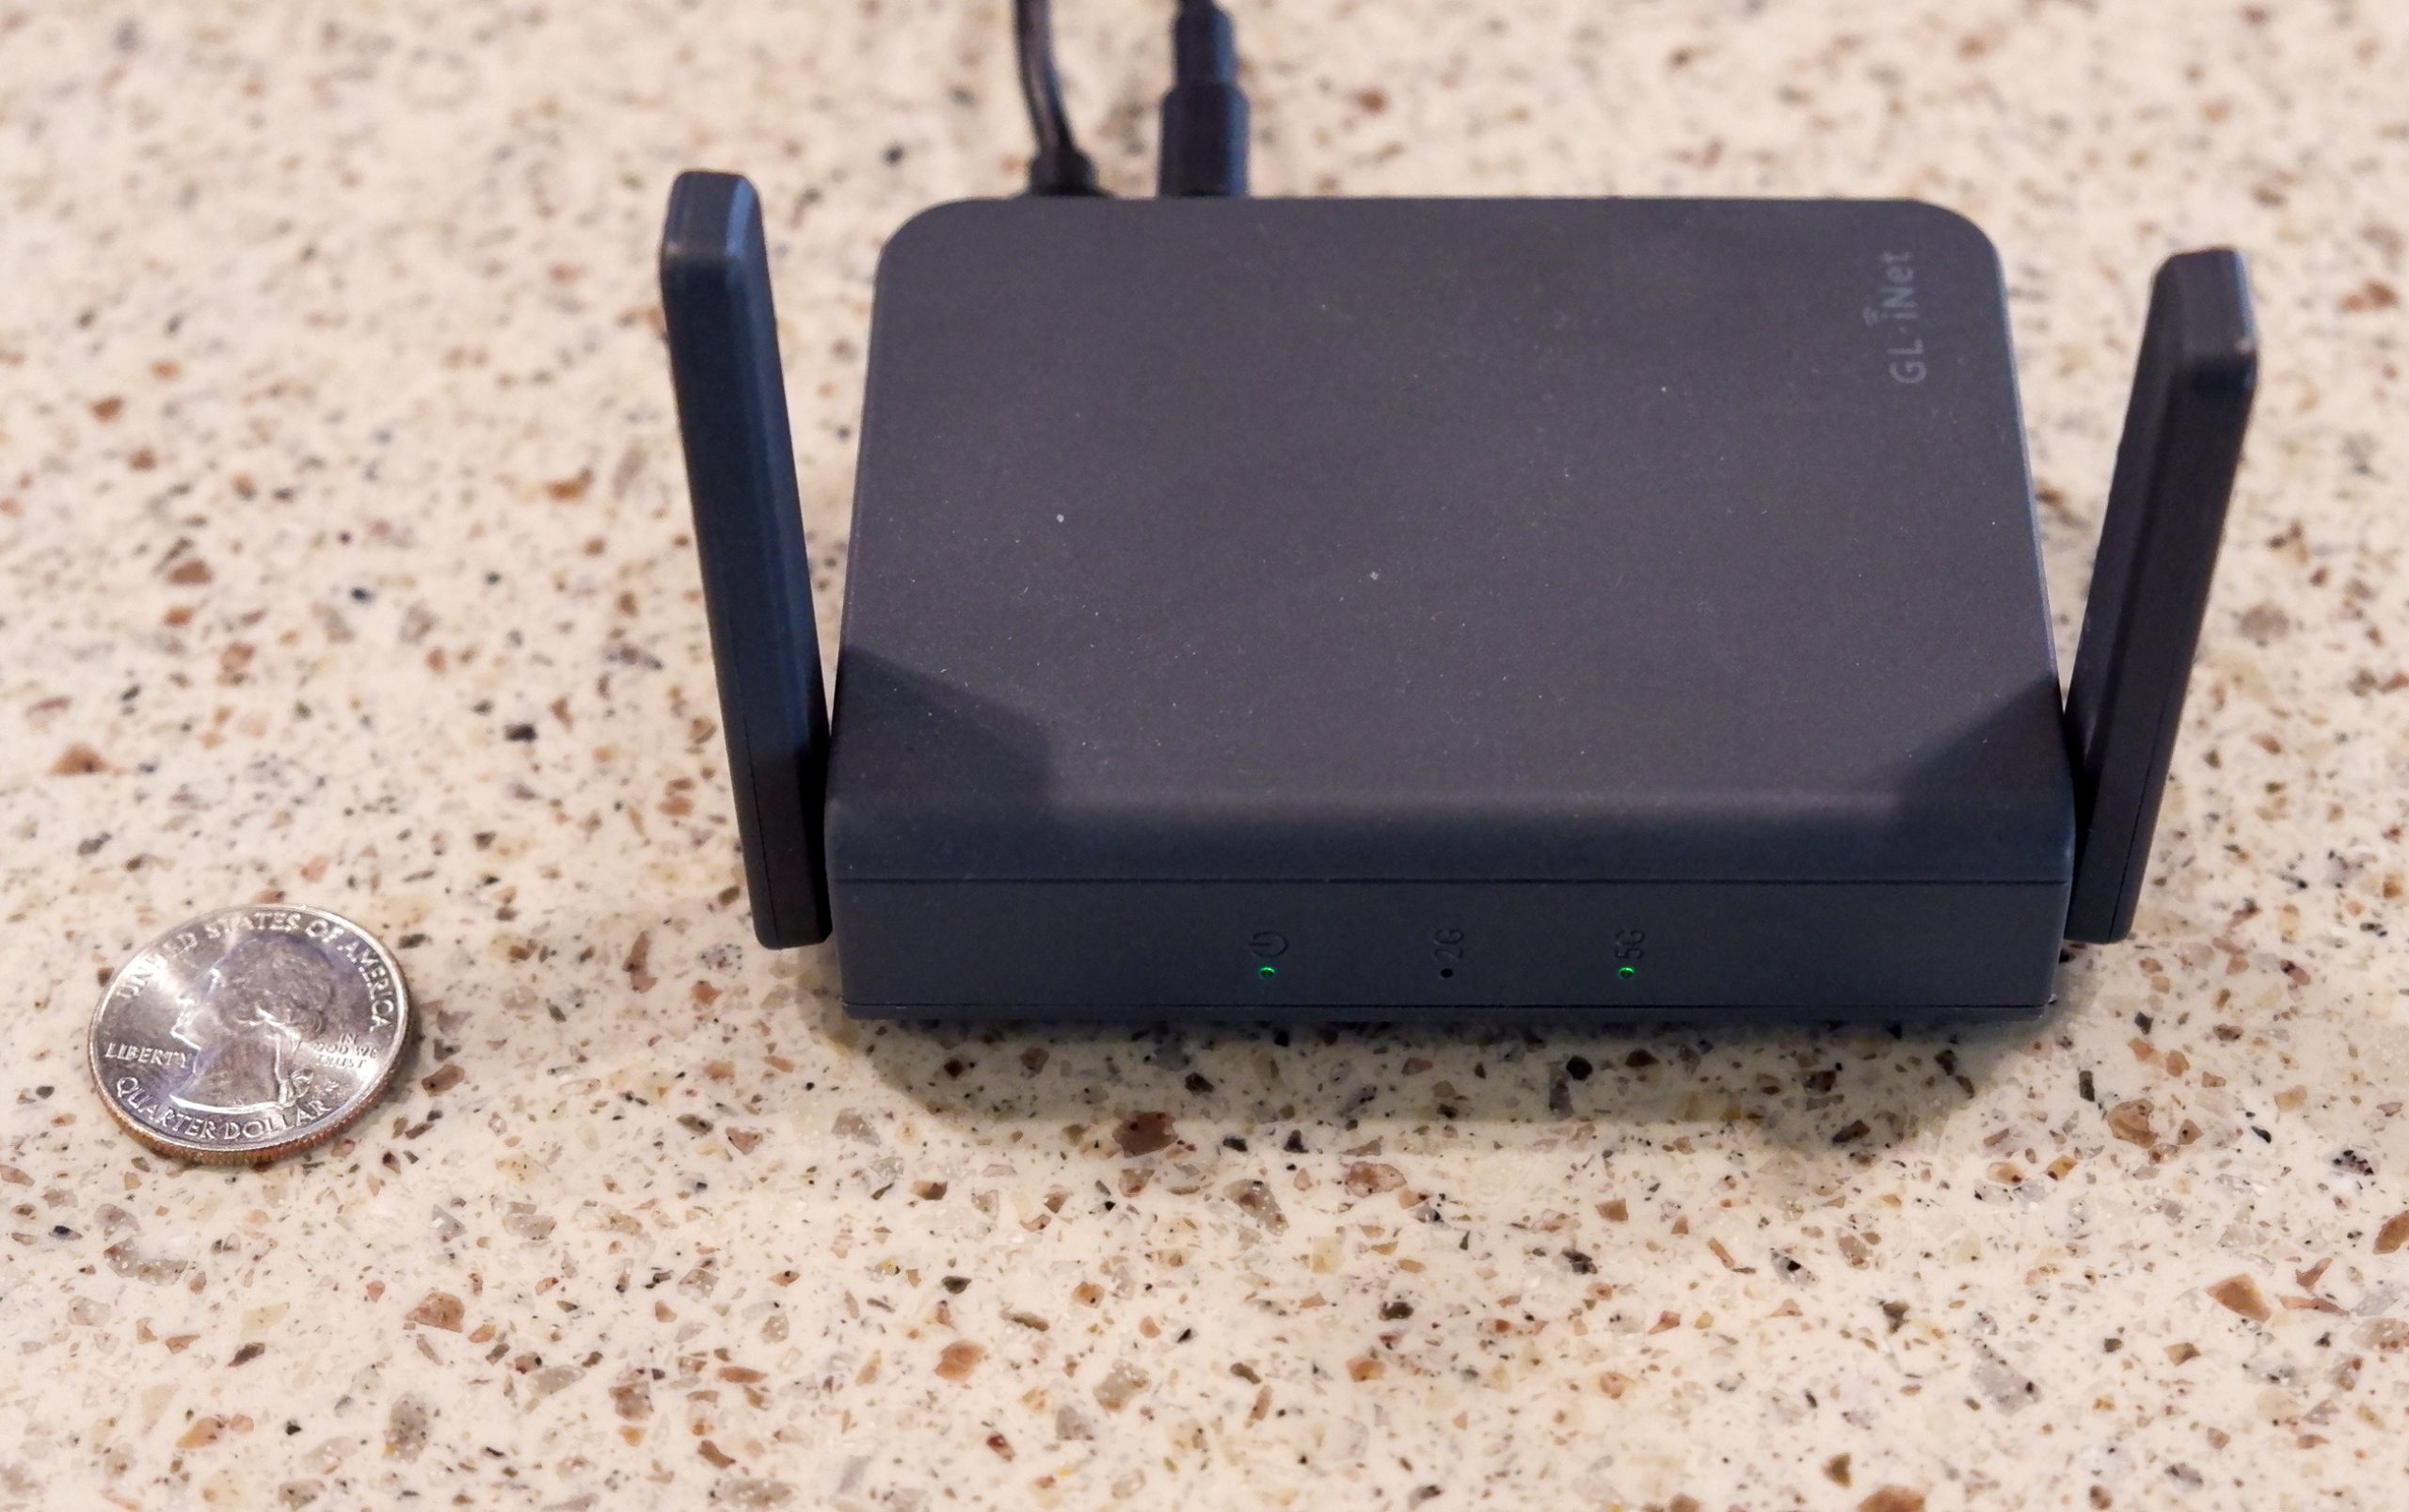 GL.iNet AR750 travel router, a low-cost boat router option - Panbo